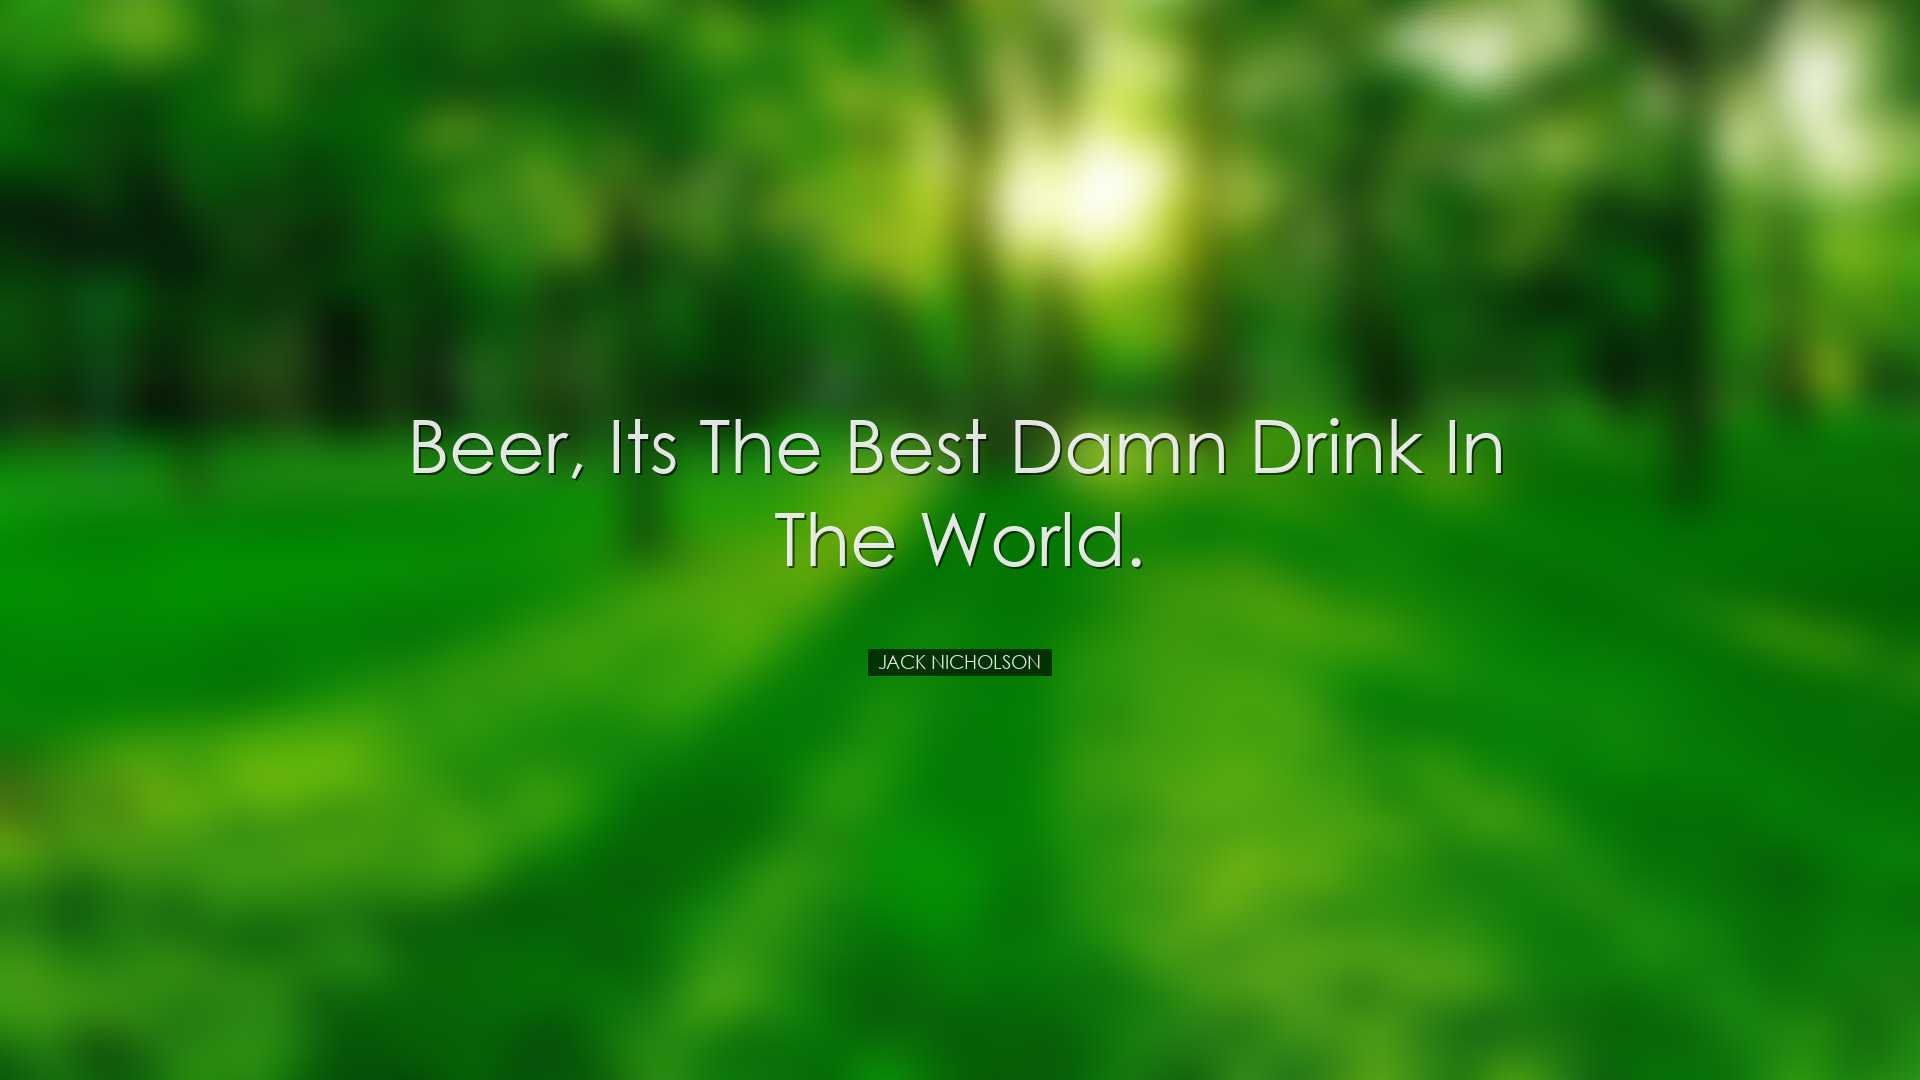 Beer, its the best damn drink in the world. - Jack Nicholson